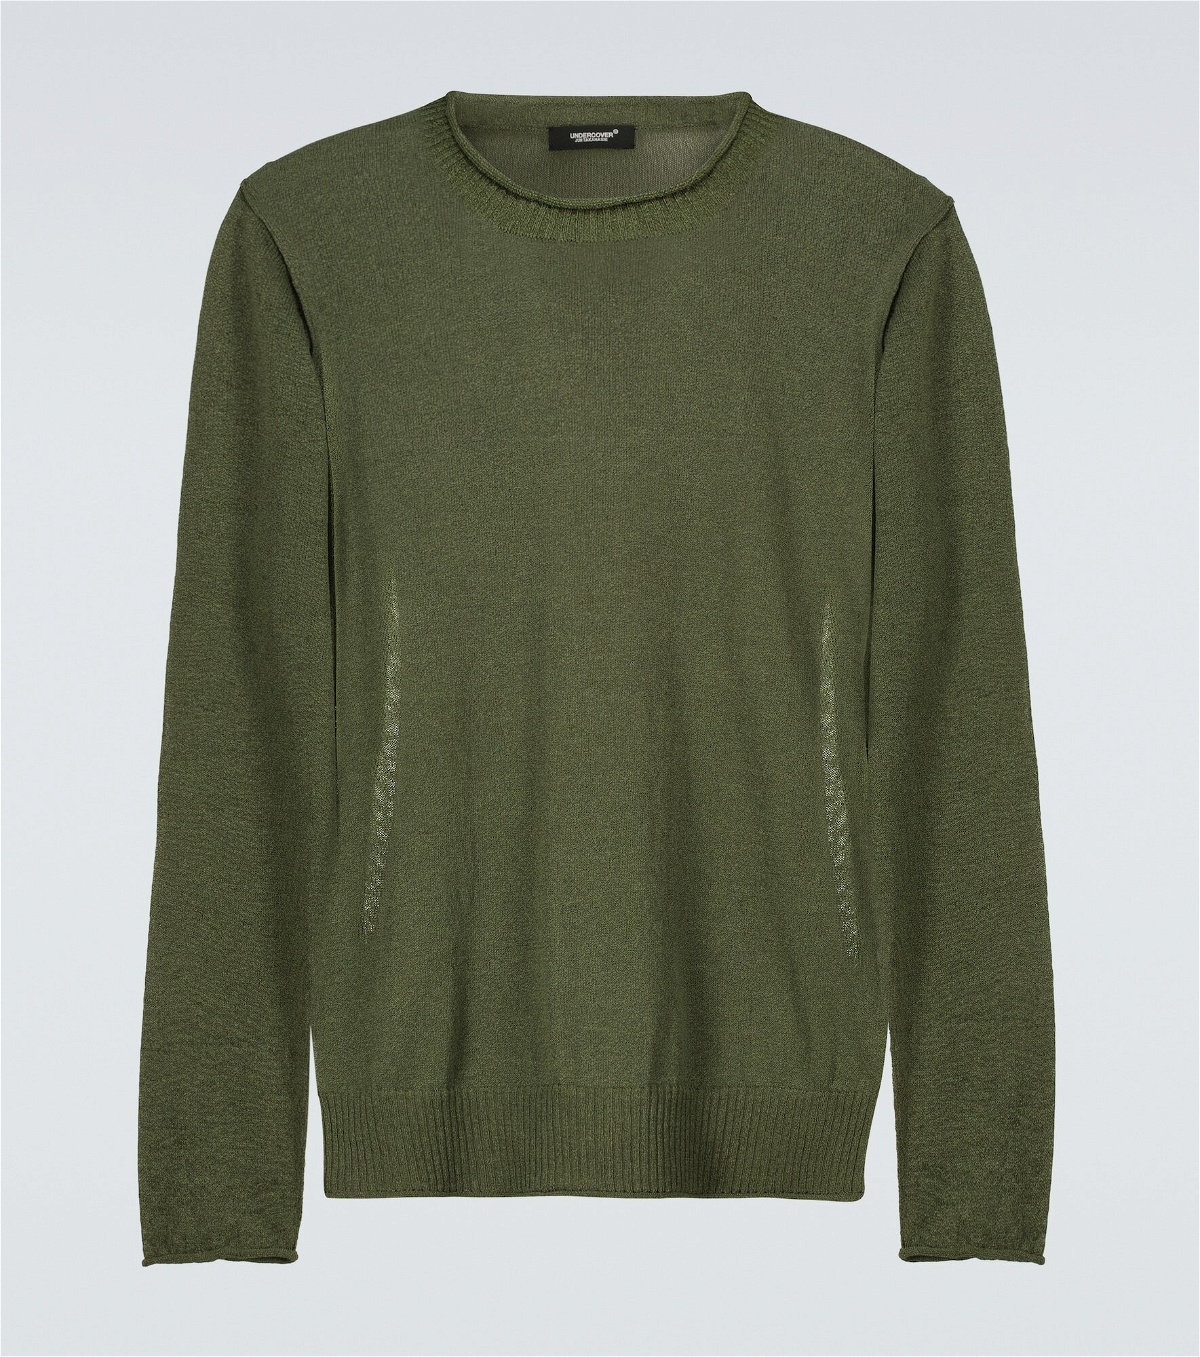 Undercover - Knitted crewneck sweater Undercover